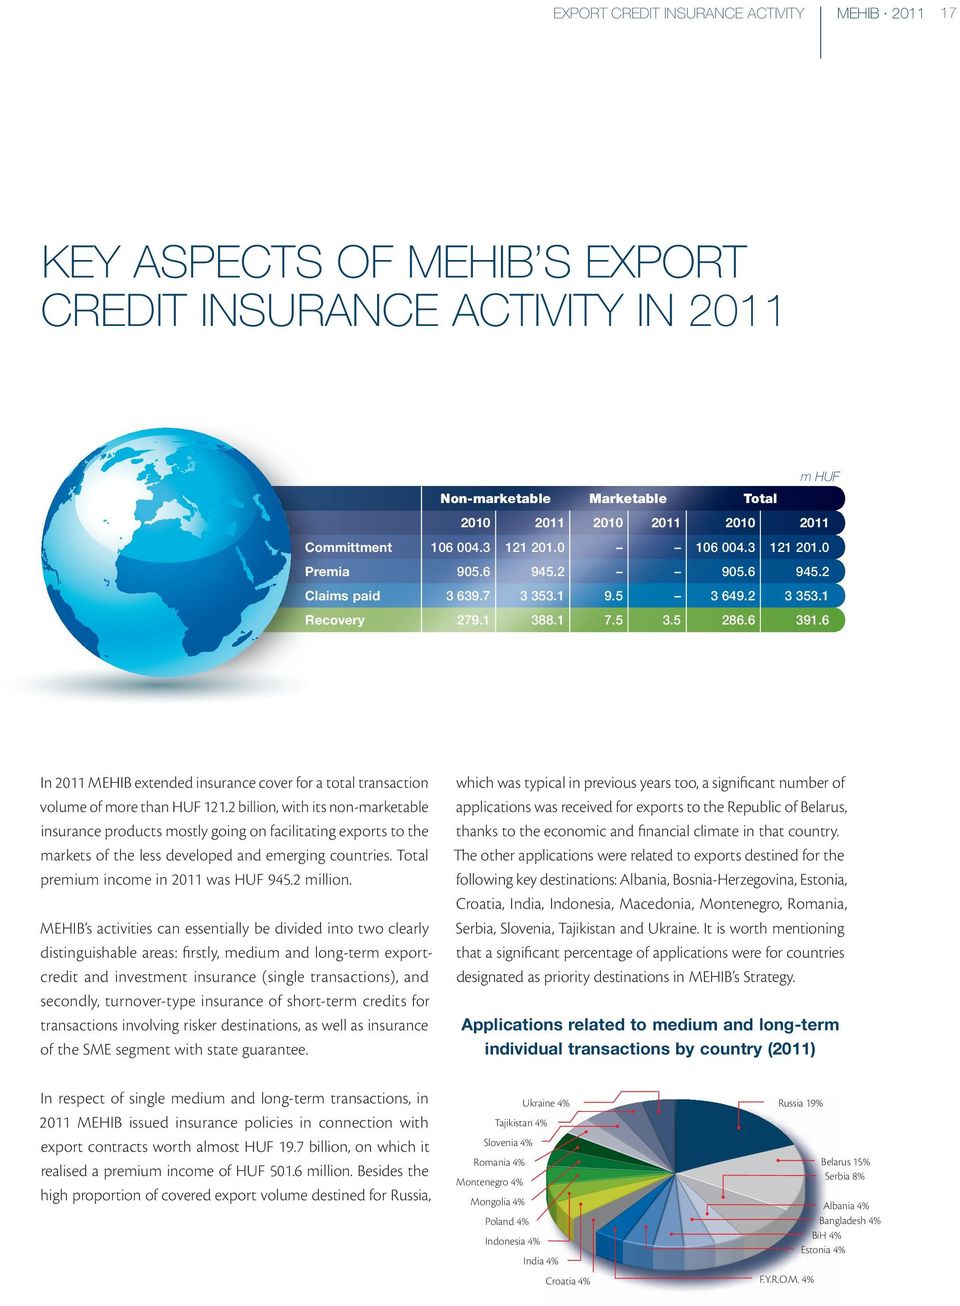 6 In 2011 MEHIB extended insurance cover for a total transaction action volume of more than HUF 121.